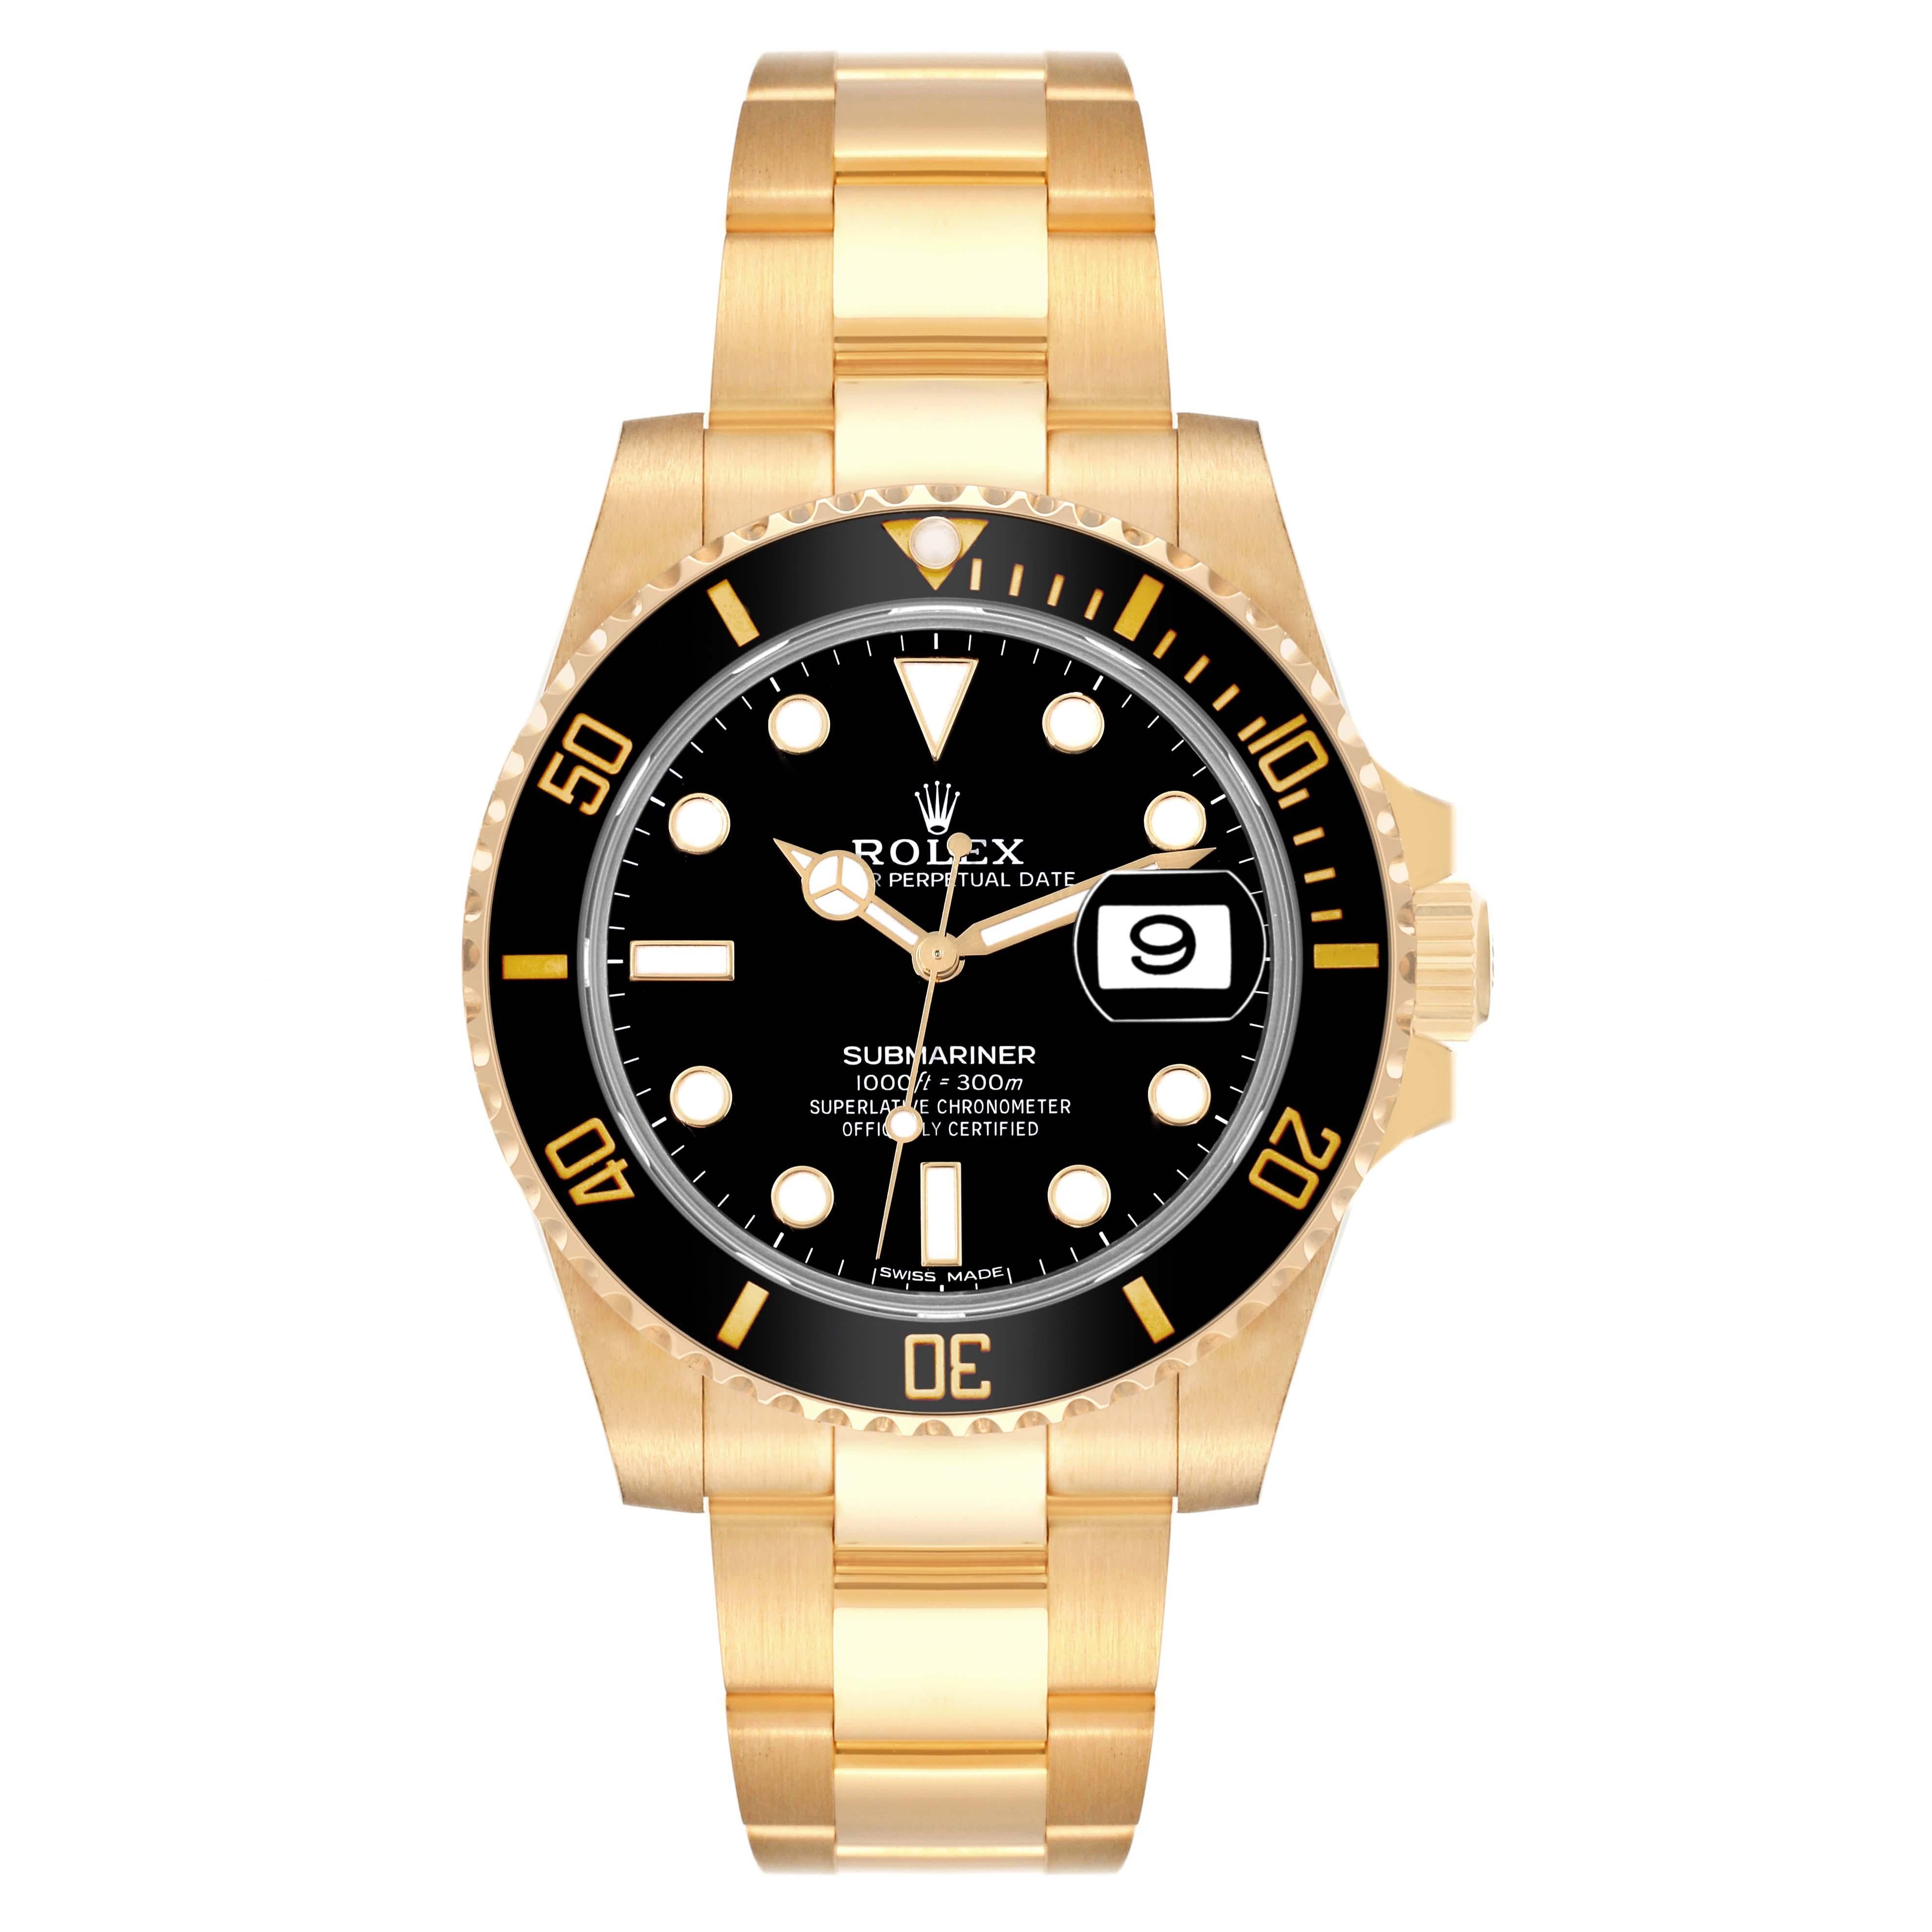 Men's Rolex Submariner Black Dial Yellow Gold Mens Watch 116618 Box Card For Sale